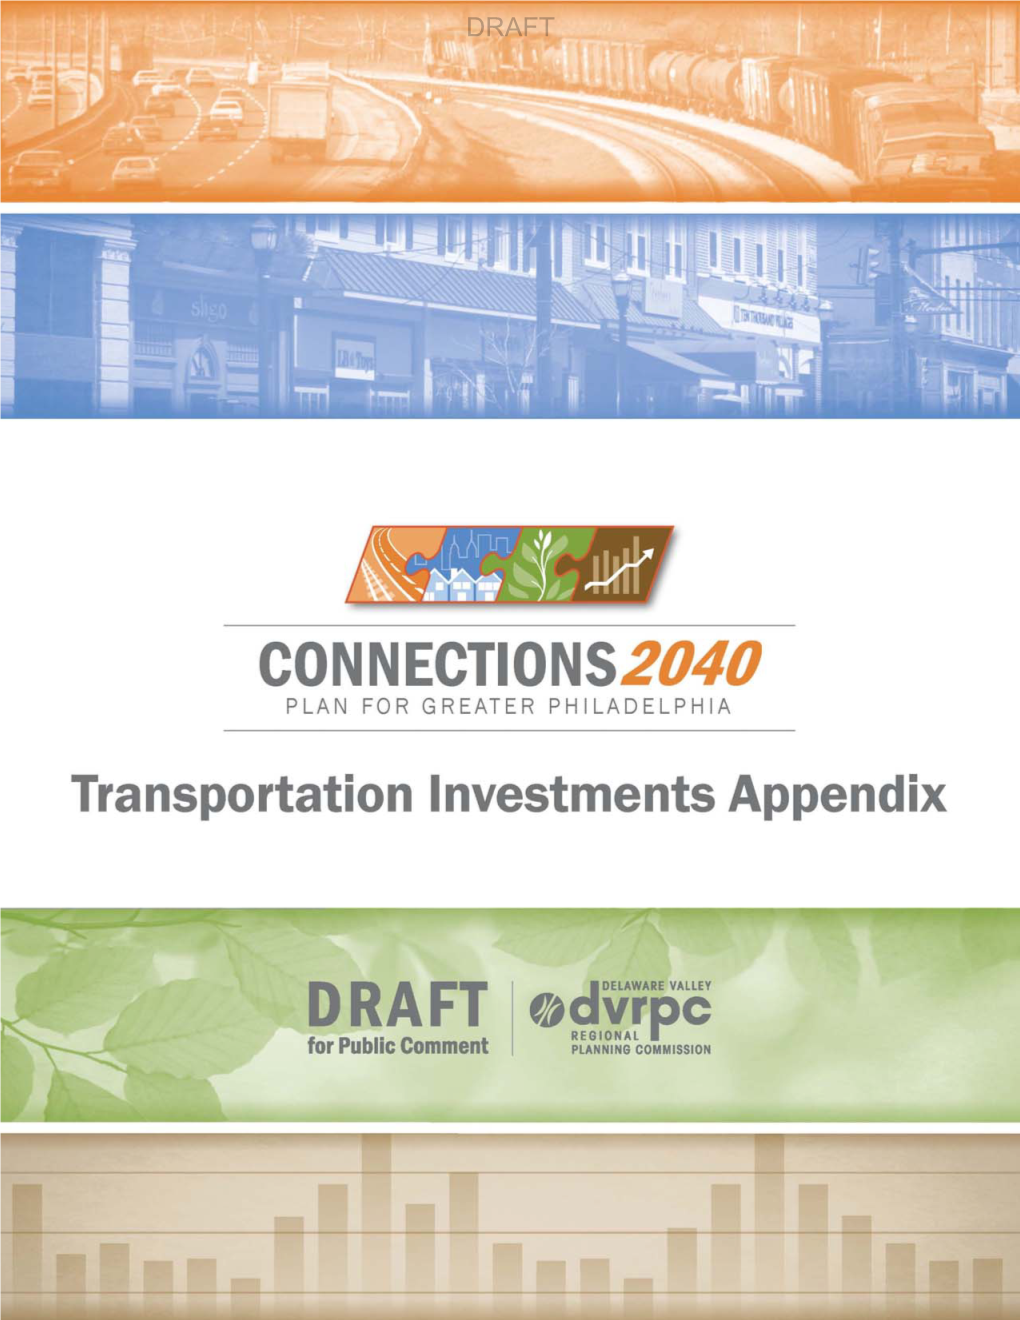 Draft Connections 2040 Transportation Investments Appendix